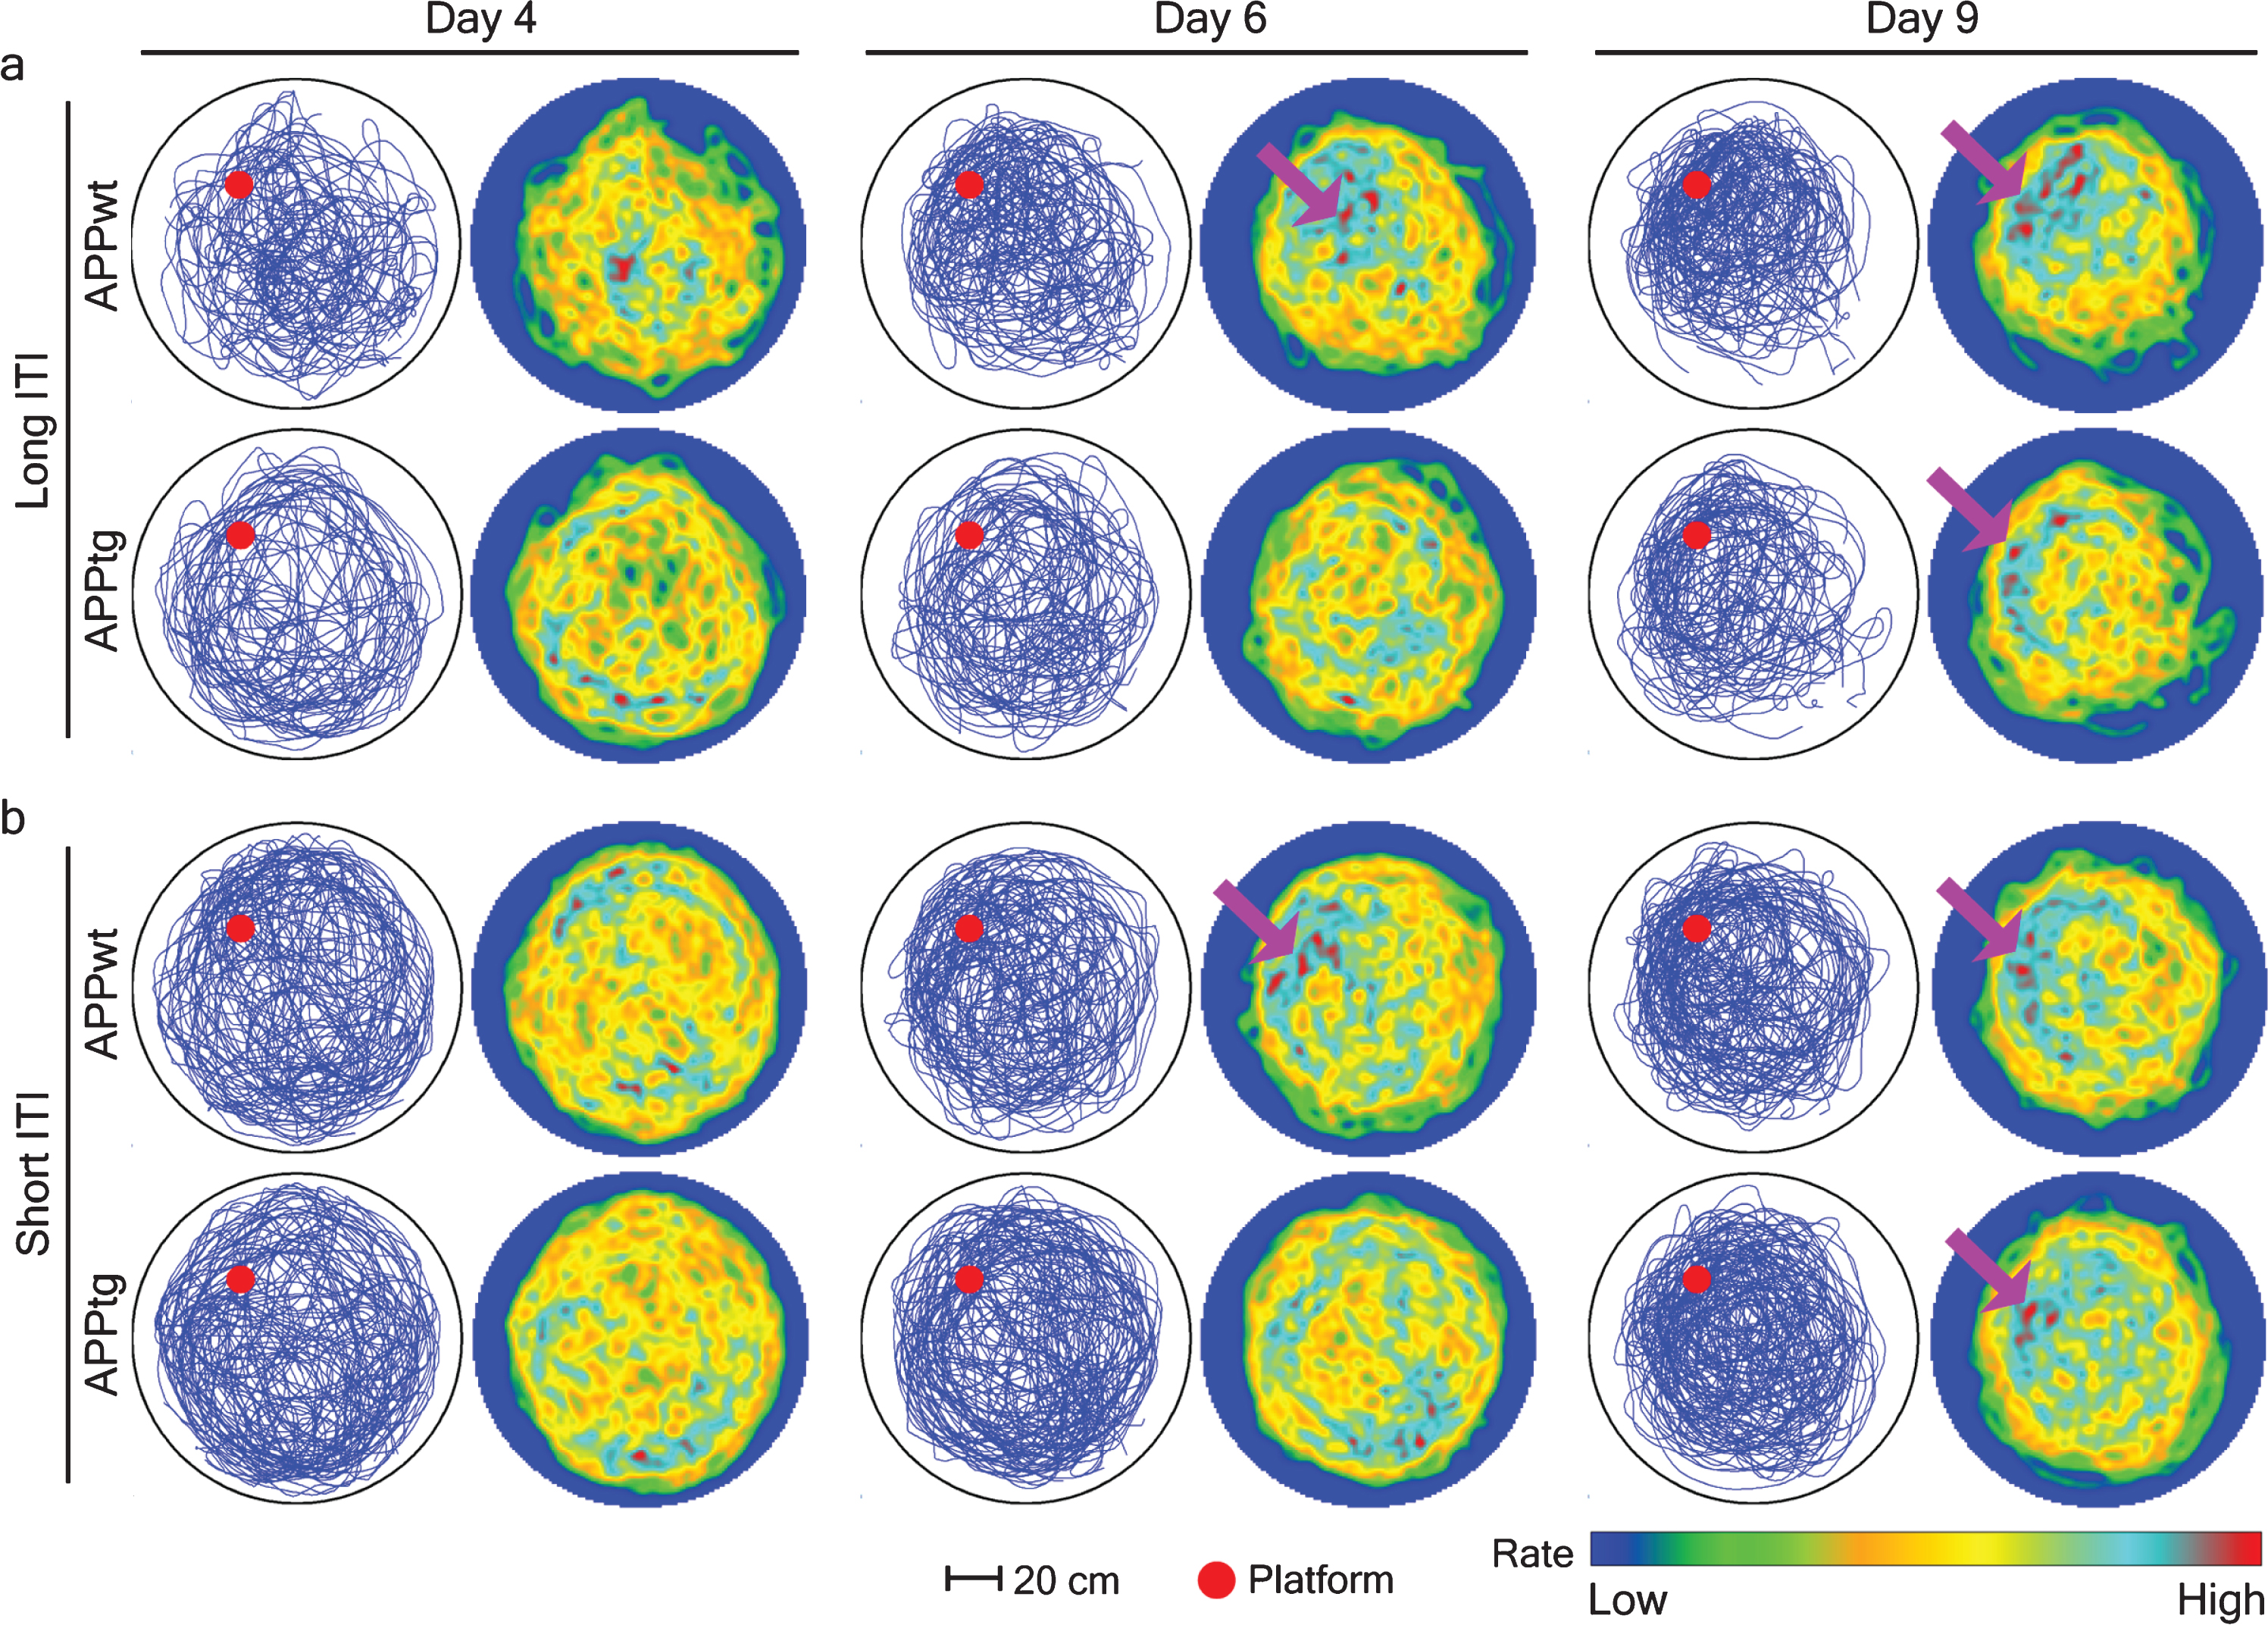 Spatial intensity estimation of different groups during probe trials in 3-month-old mice. A single probe trial was conducted before normal training trials on day 4, 6, and 9. Mouse trajectories from each group were combined to characterize the location of spatial hotspots. To this aim, the pixel coordinates were extracted from an image and later dropped inside the circular window of observation where Gaussian kernel smoothing was done to create a spatial hotspot. Each row is a group with long or short-ITI protocols. Left, accumulated mice trajectories per group (blue lines) with indicated platform position (red colored circle). Right, color-coded spatial rate map with peak rate (Scale bar). Purple arrows show the location of spatial hotspots.